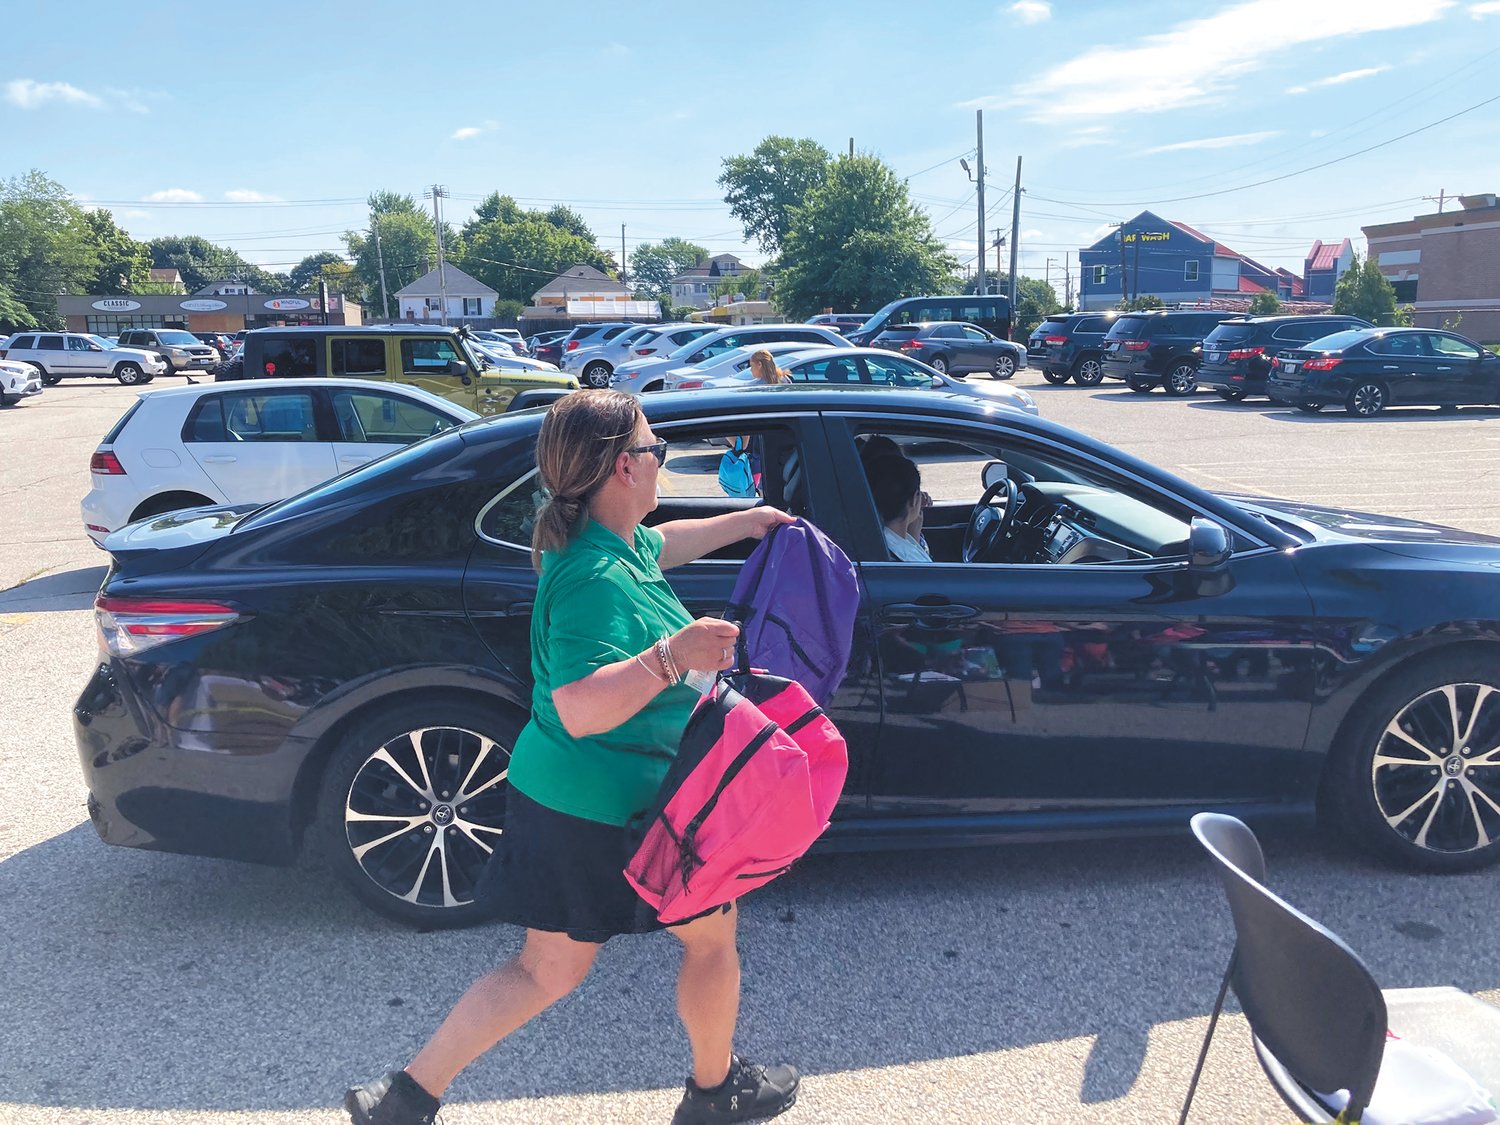 KEEP THE LINE GOING: With a long line of cars, volunteers hastily gathered backpacks and handed them over to families Saturday morning. (Herald photo)